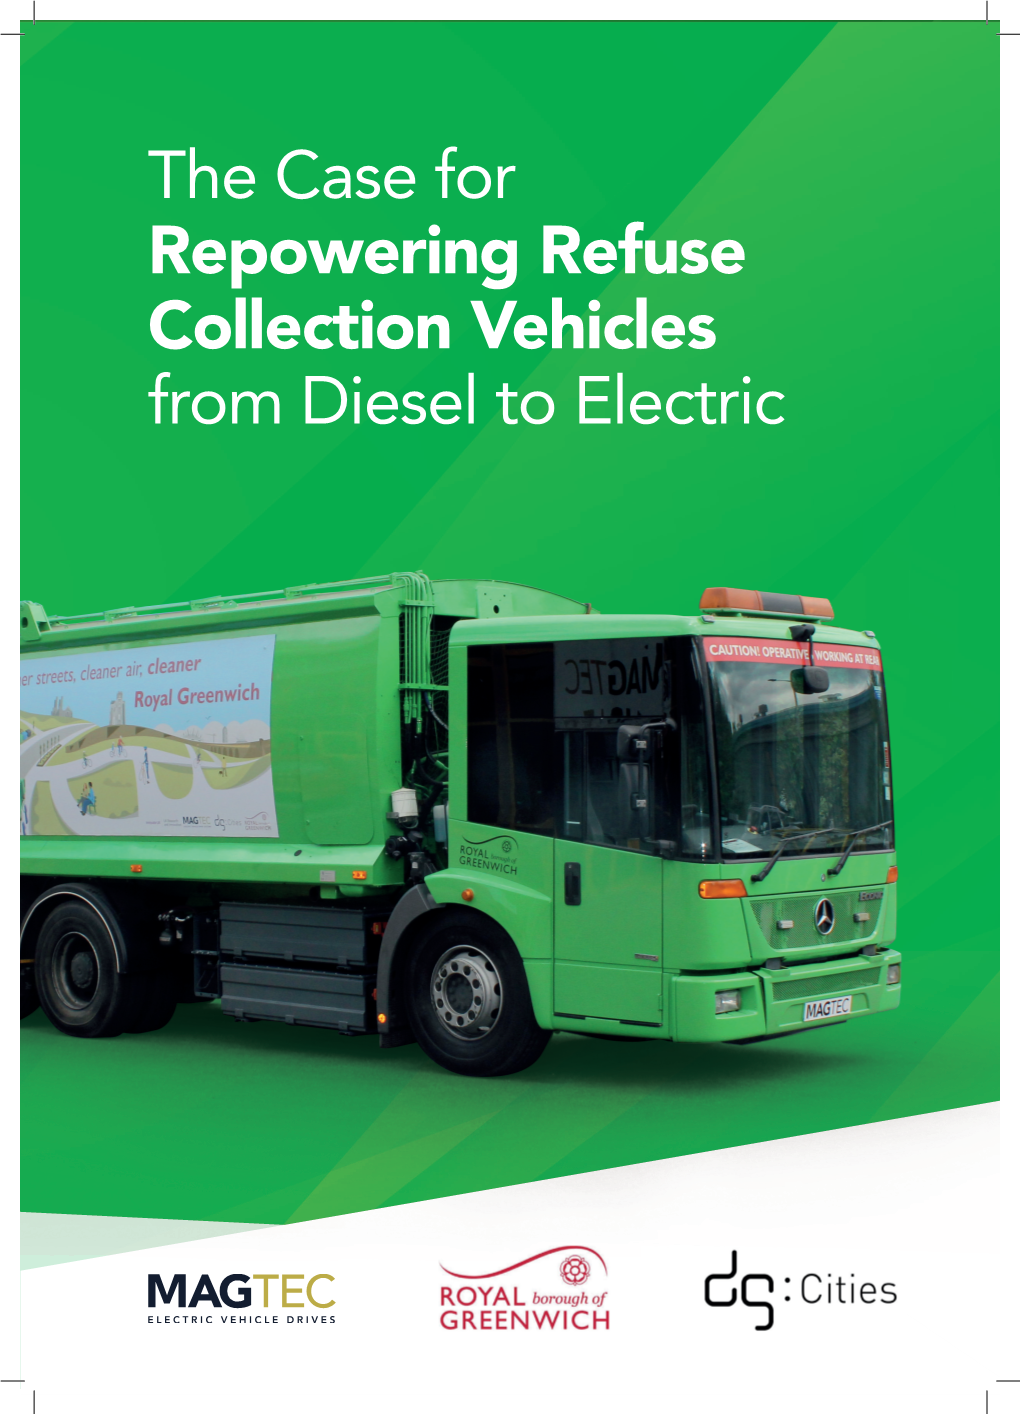 The Case for Repowering Refuse Collection Vehicles from Diesel to Electric 2